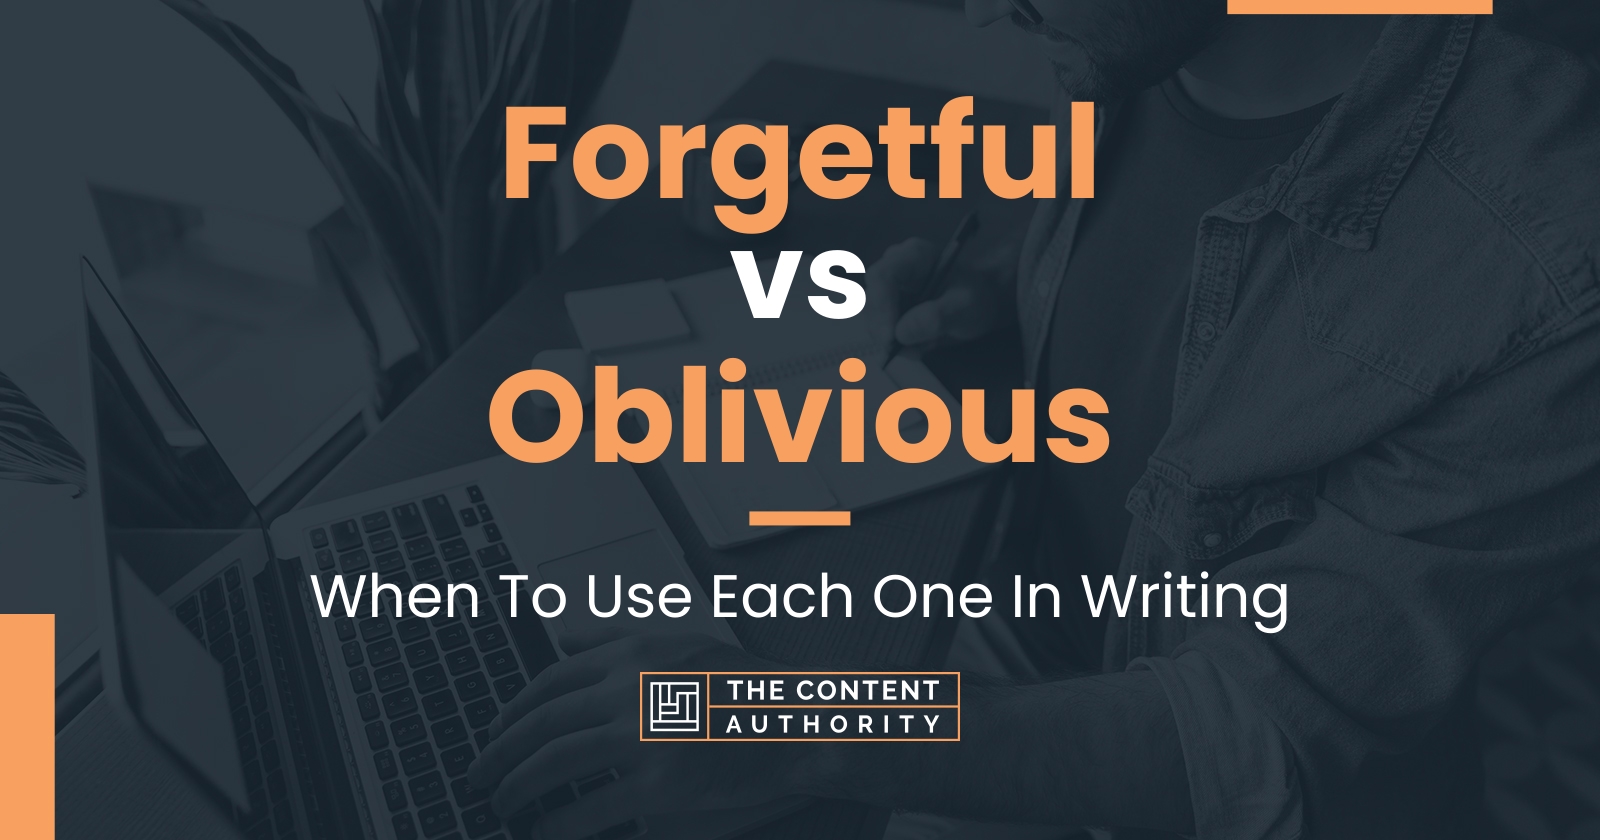 Forgetful vs Oblivious: When To Use Each One In Writing